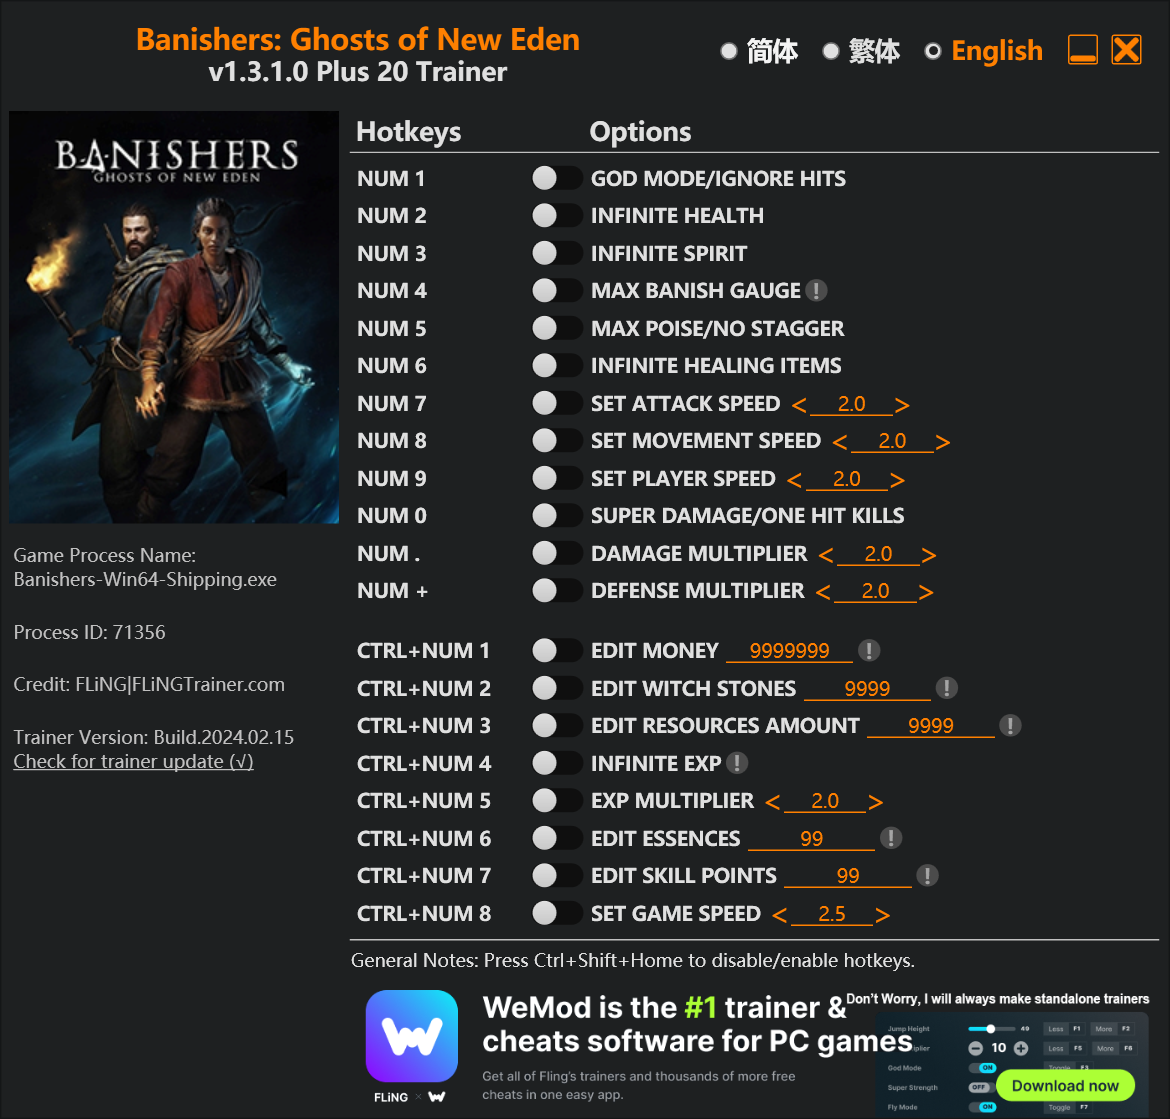 Banishers: Ghosts of New Eden Trainer/Cheat